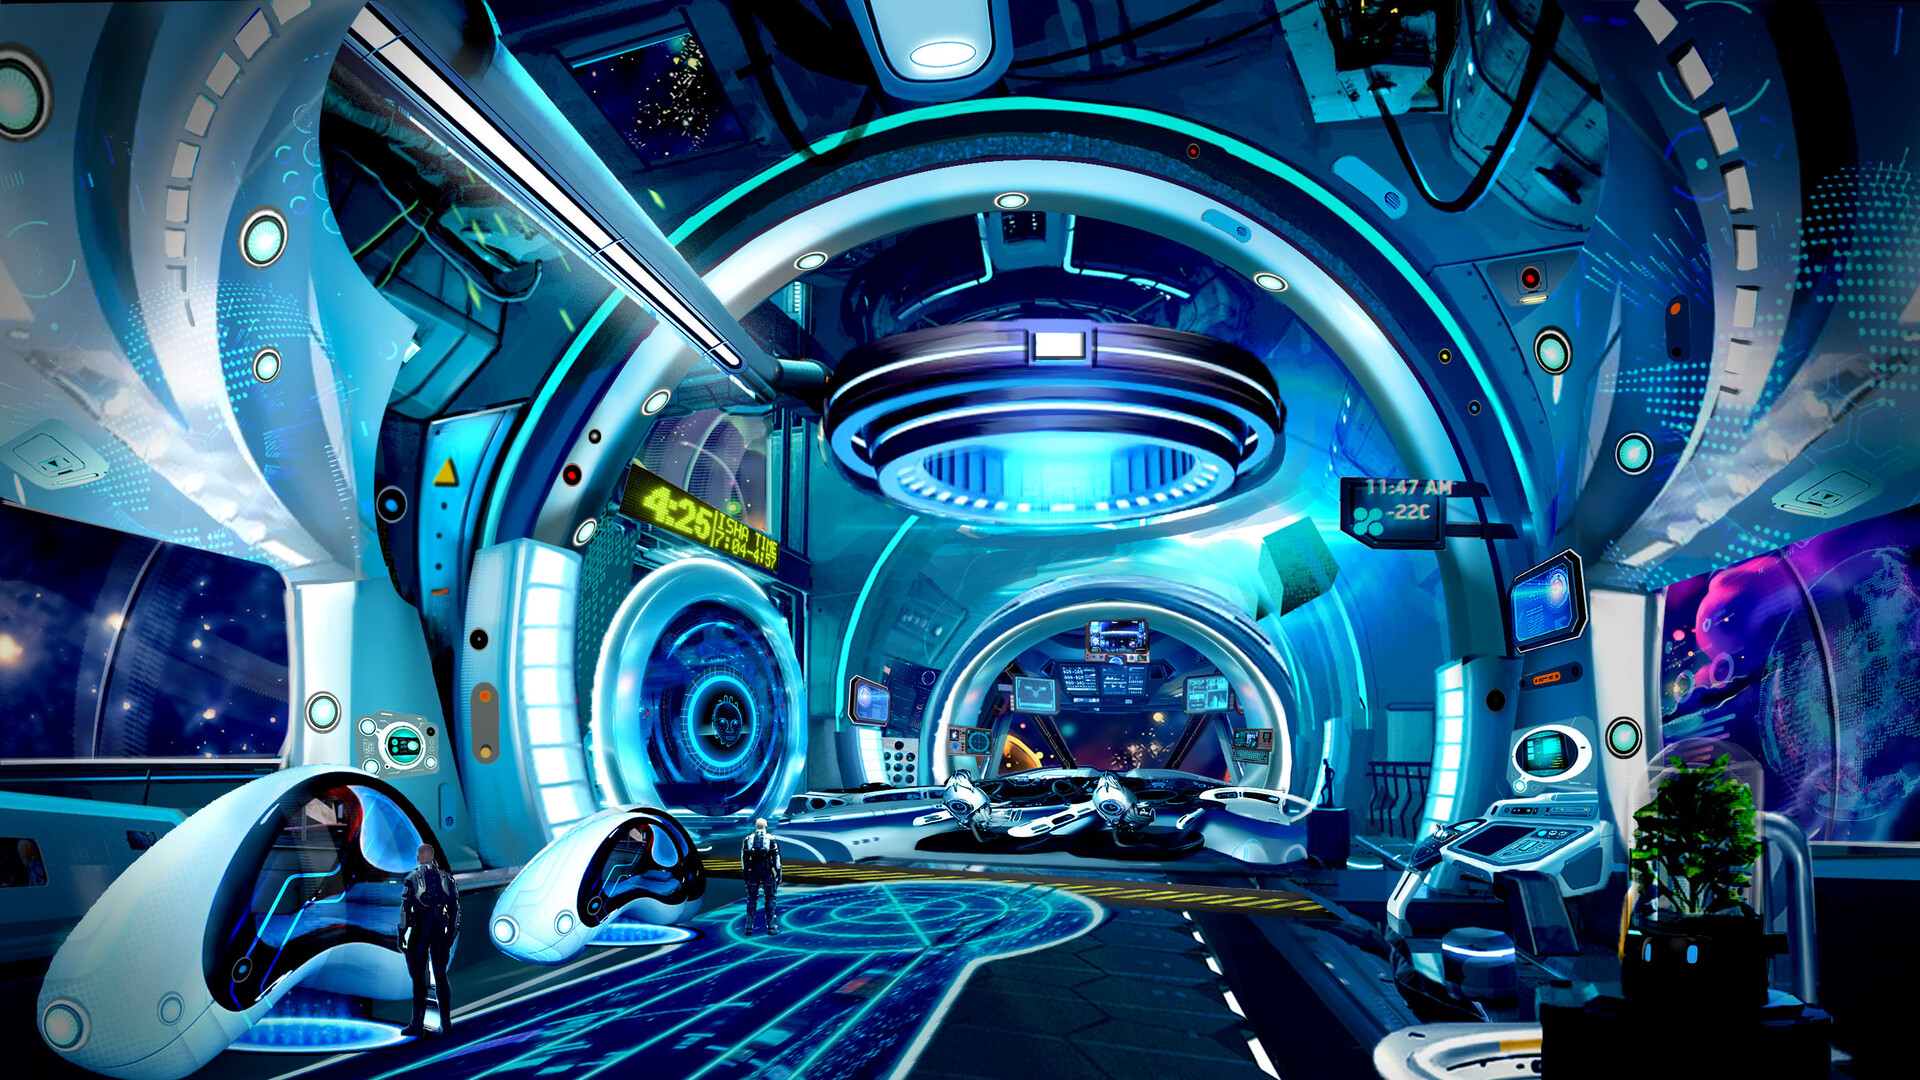 ArtStation - Sci-fi futuristic Environment of a room from a spaceship